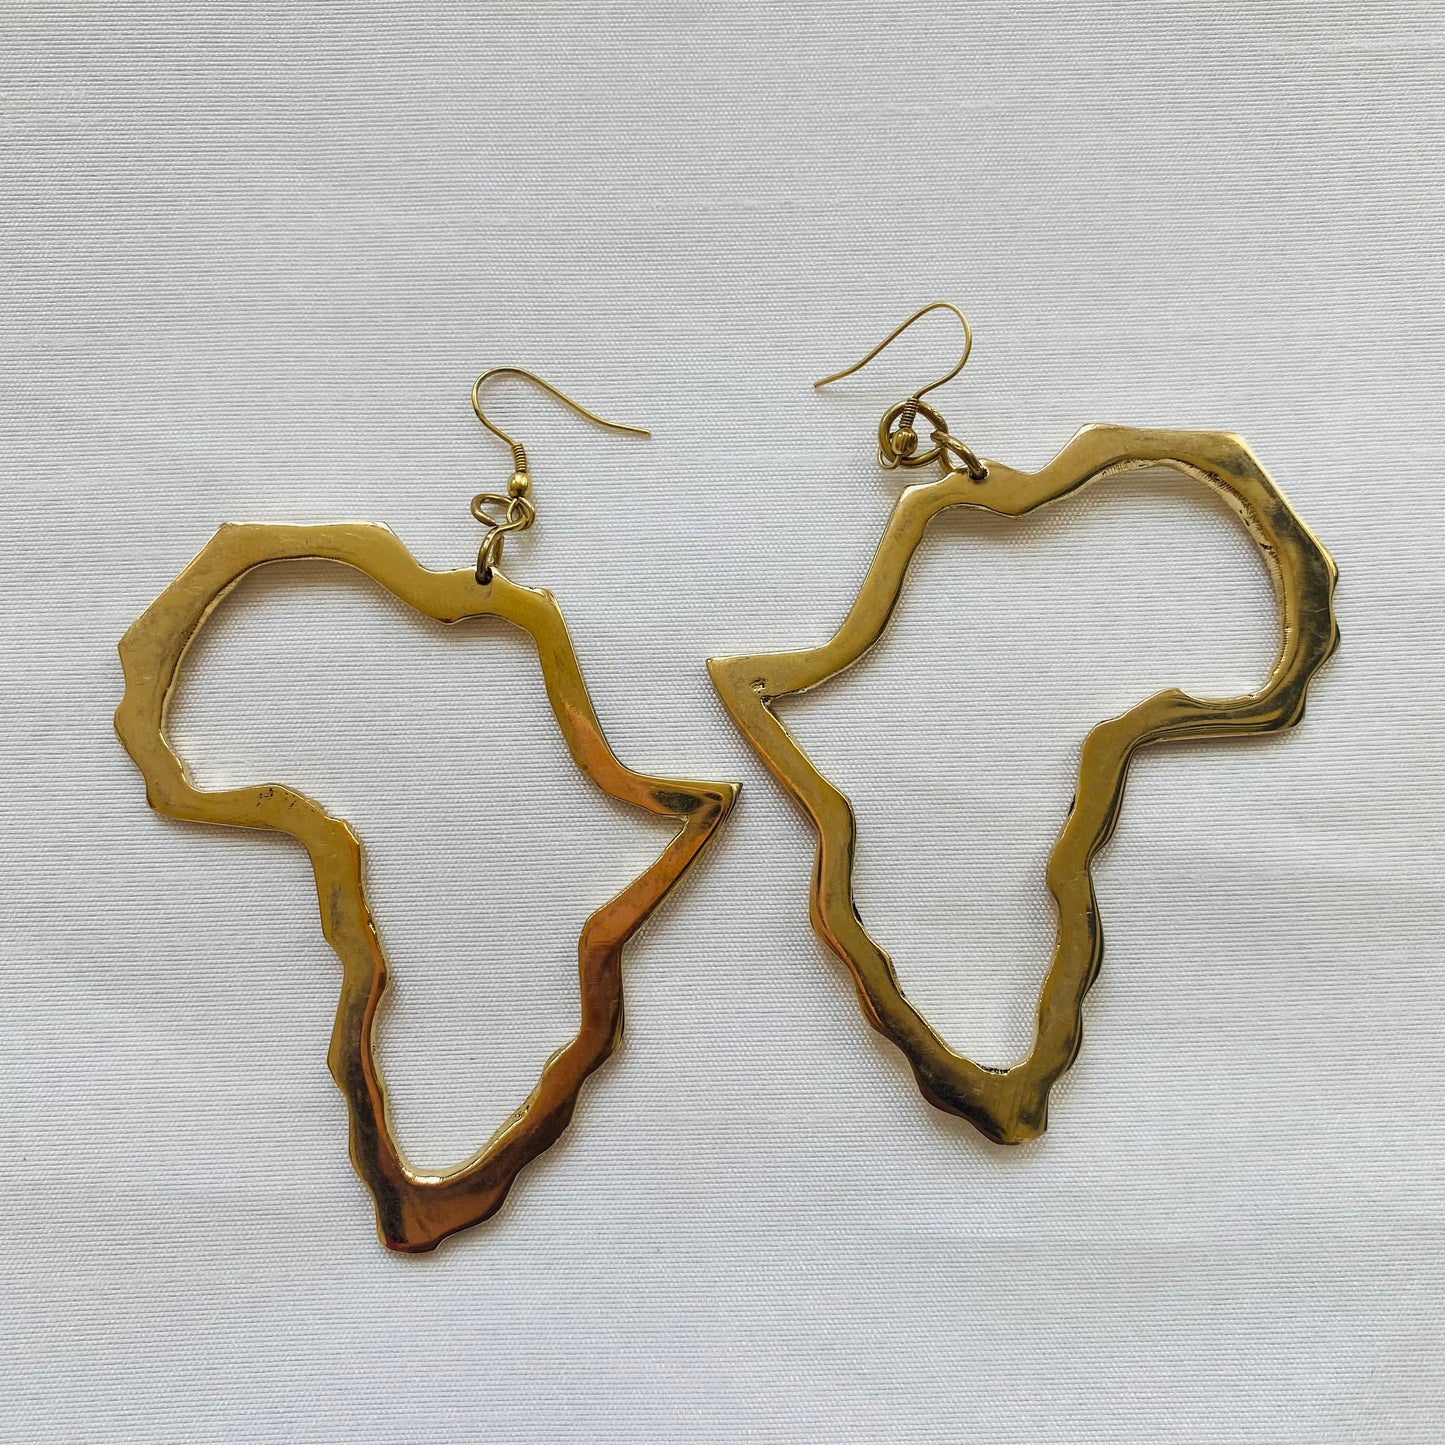 Cut-out Map of Africa Dangles